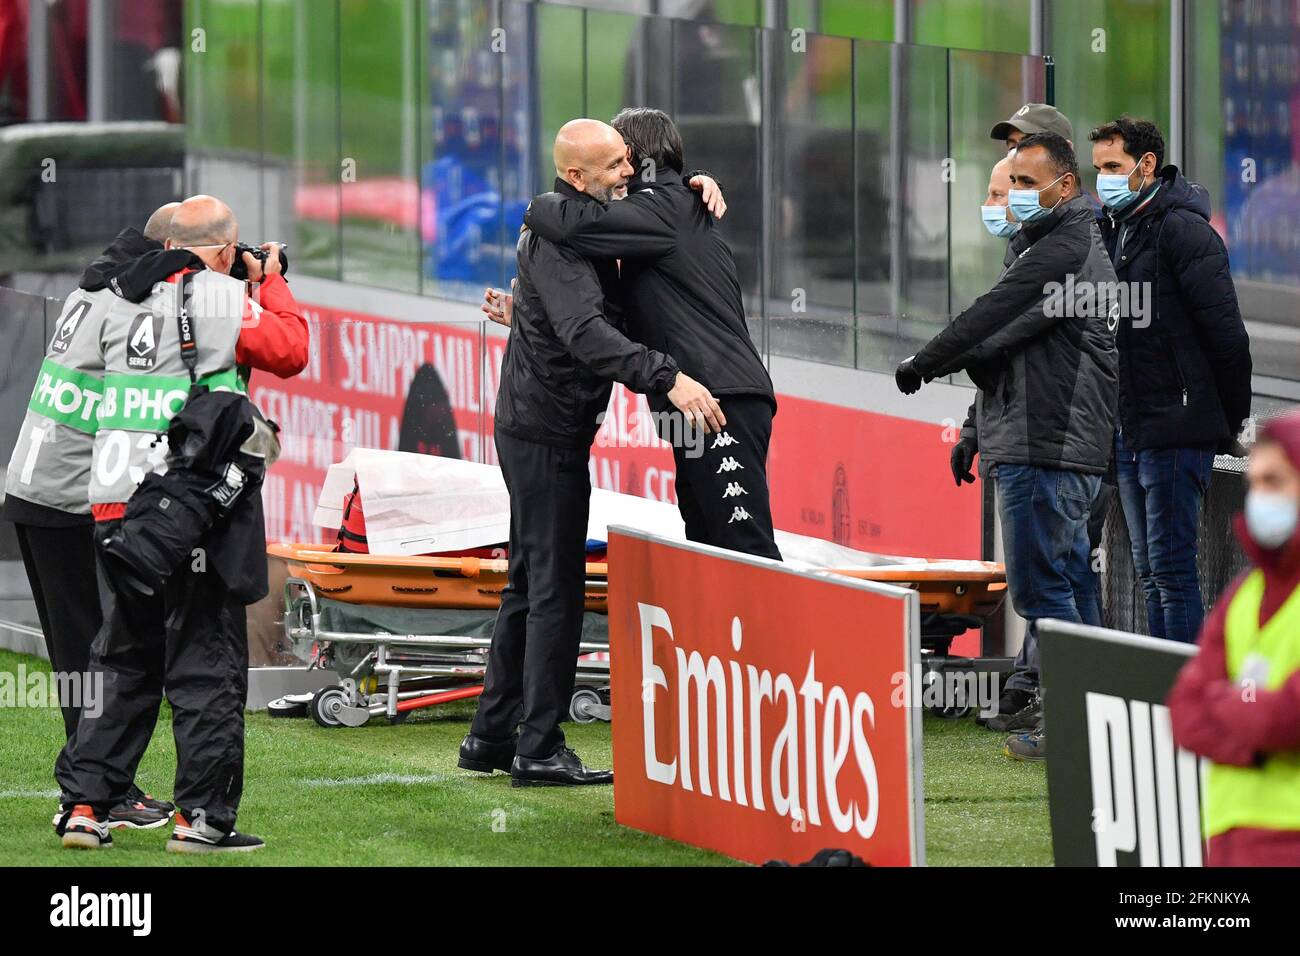 Milano, Italy. 01st, May 2021. Head coach Stefano Pioli of AC Milan greets head coach Filippo Inzaghi of Benevento before the Serie A match between AC Milan and Benevento at San Siro in Milano. (Photo credit: Gonzales Photo - Tommaso Fimiano). Stock Photo